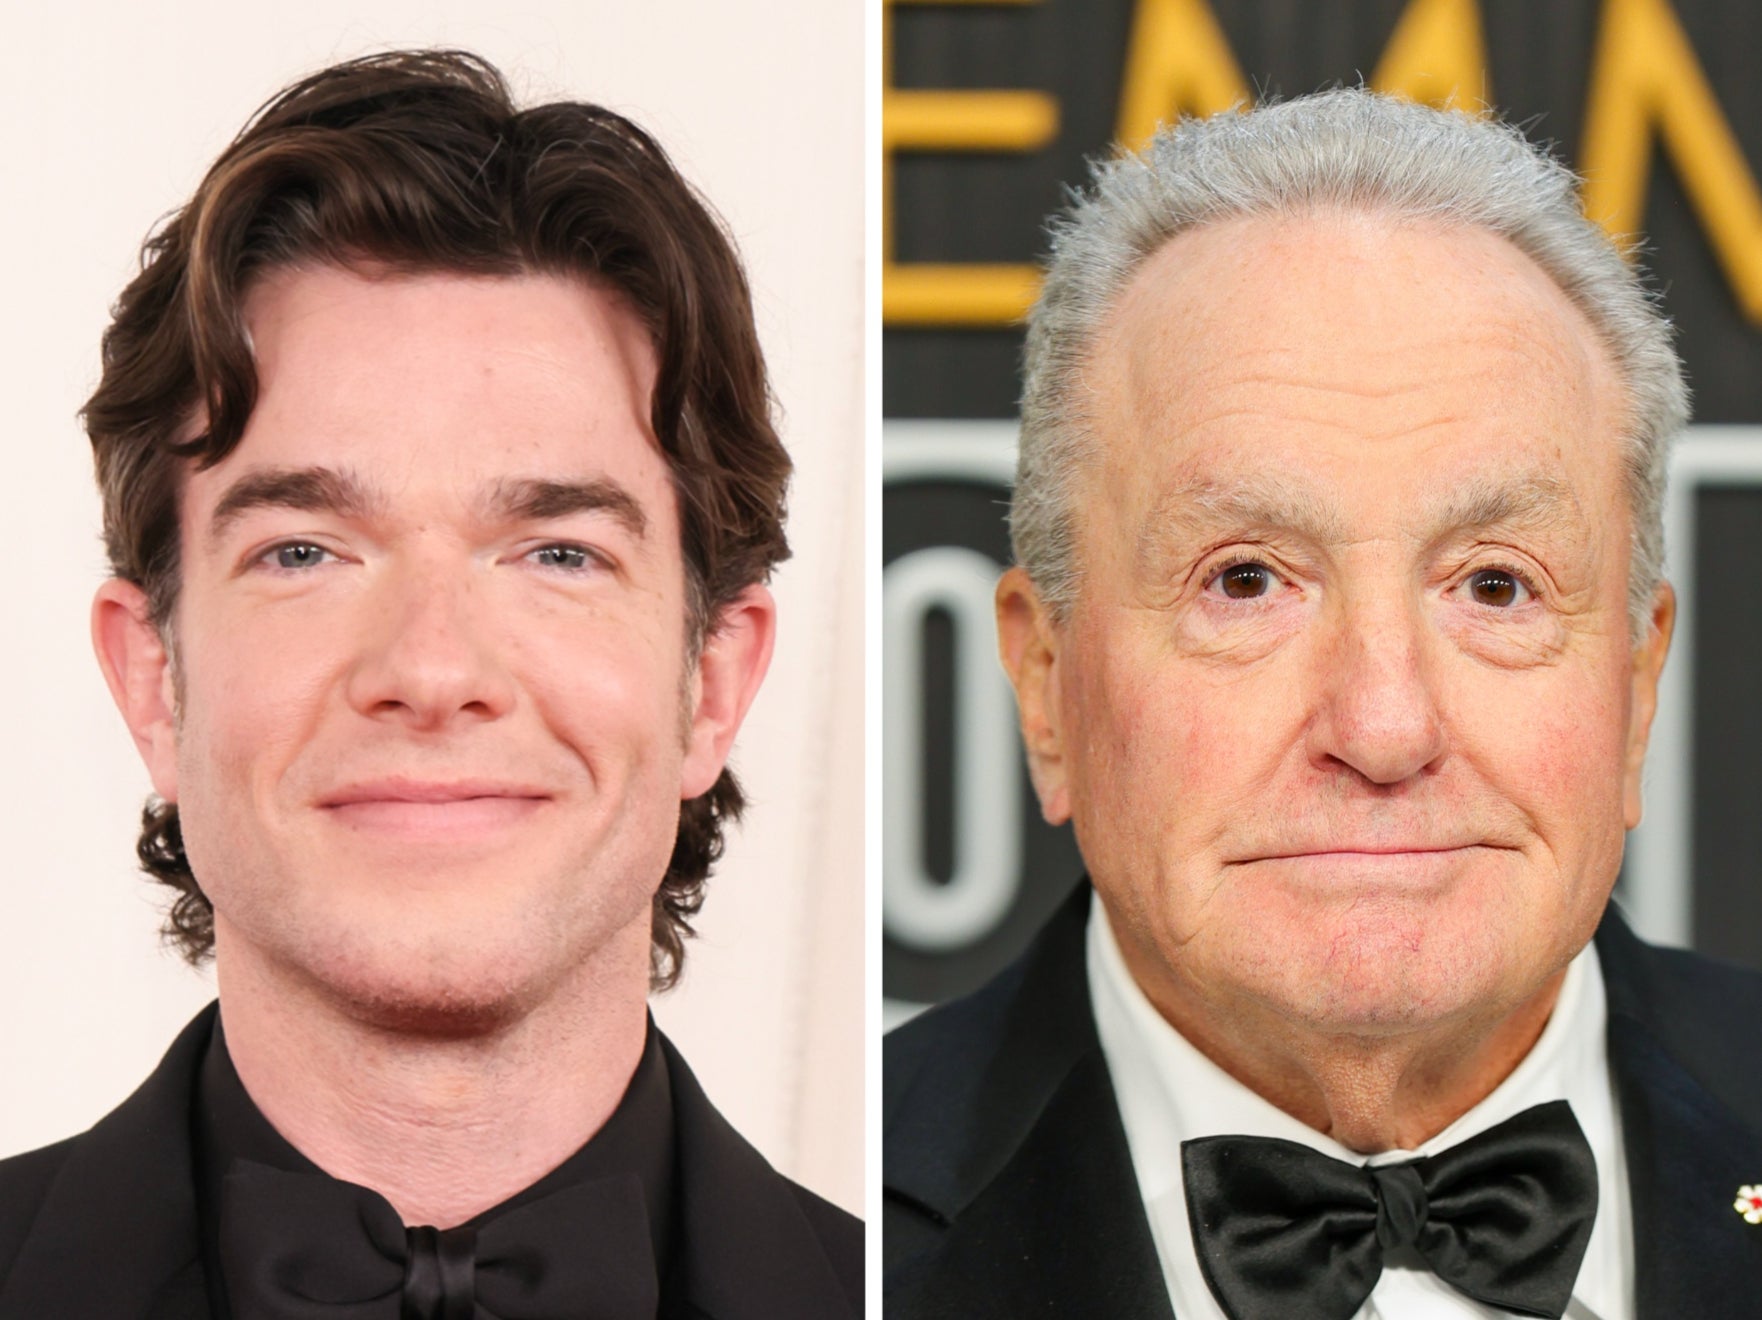 Michaels reminded Mulaney that ‘John didn’t want to die’